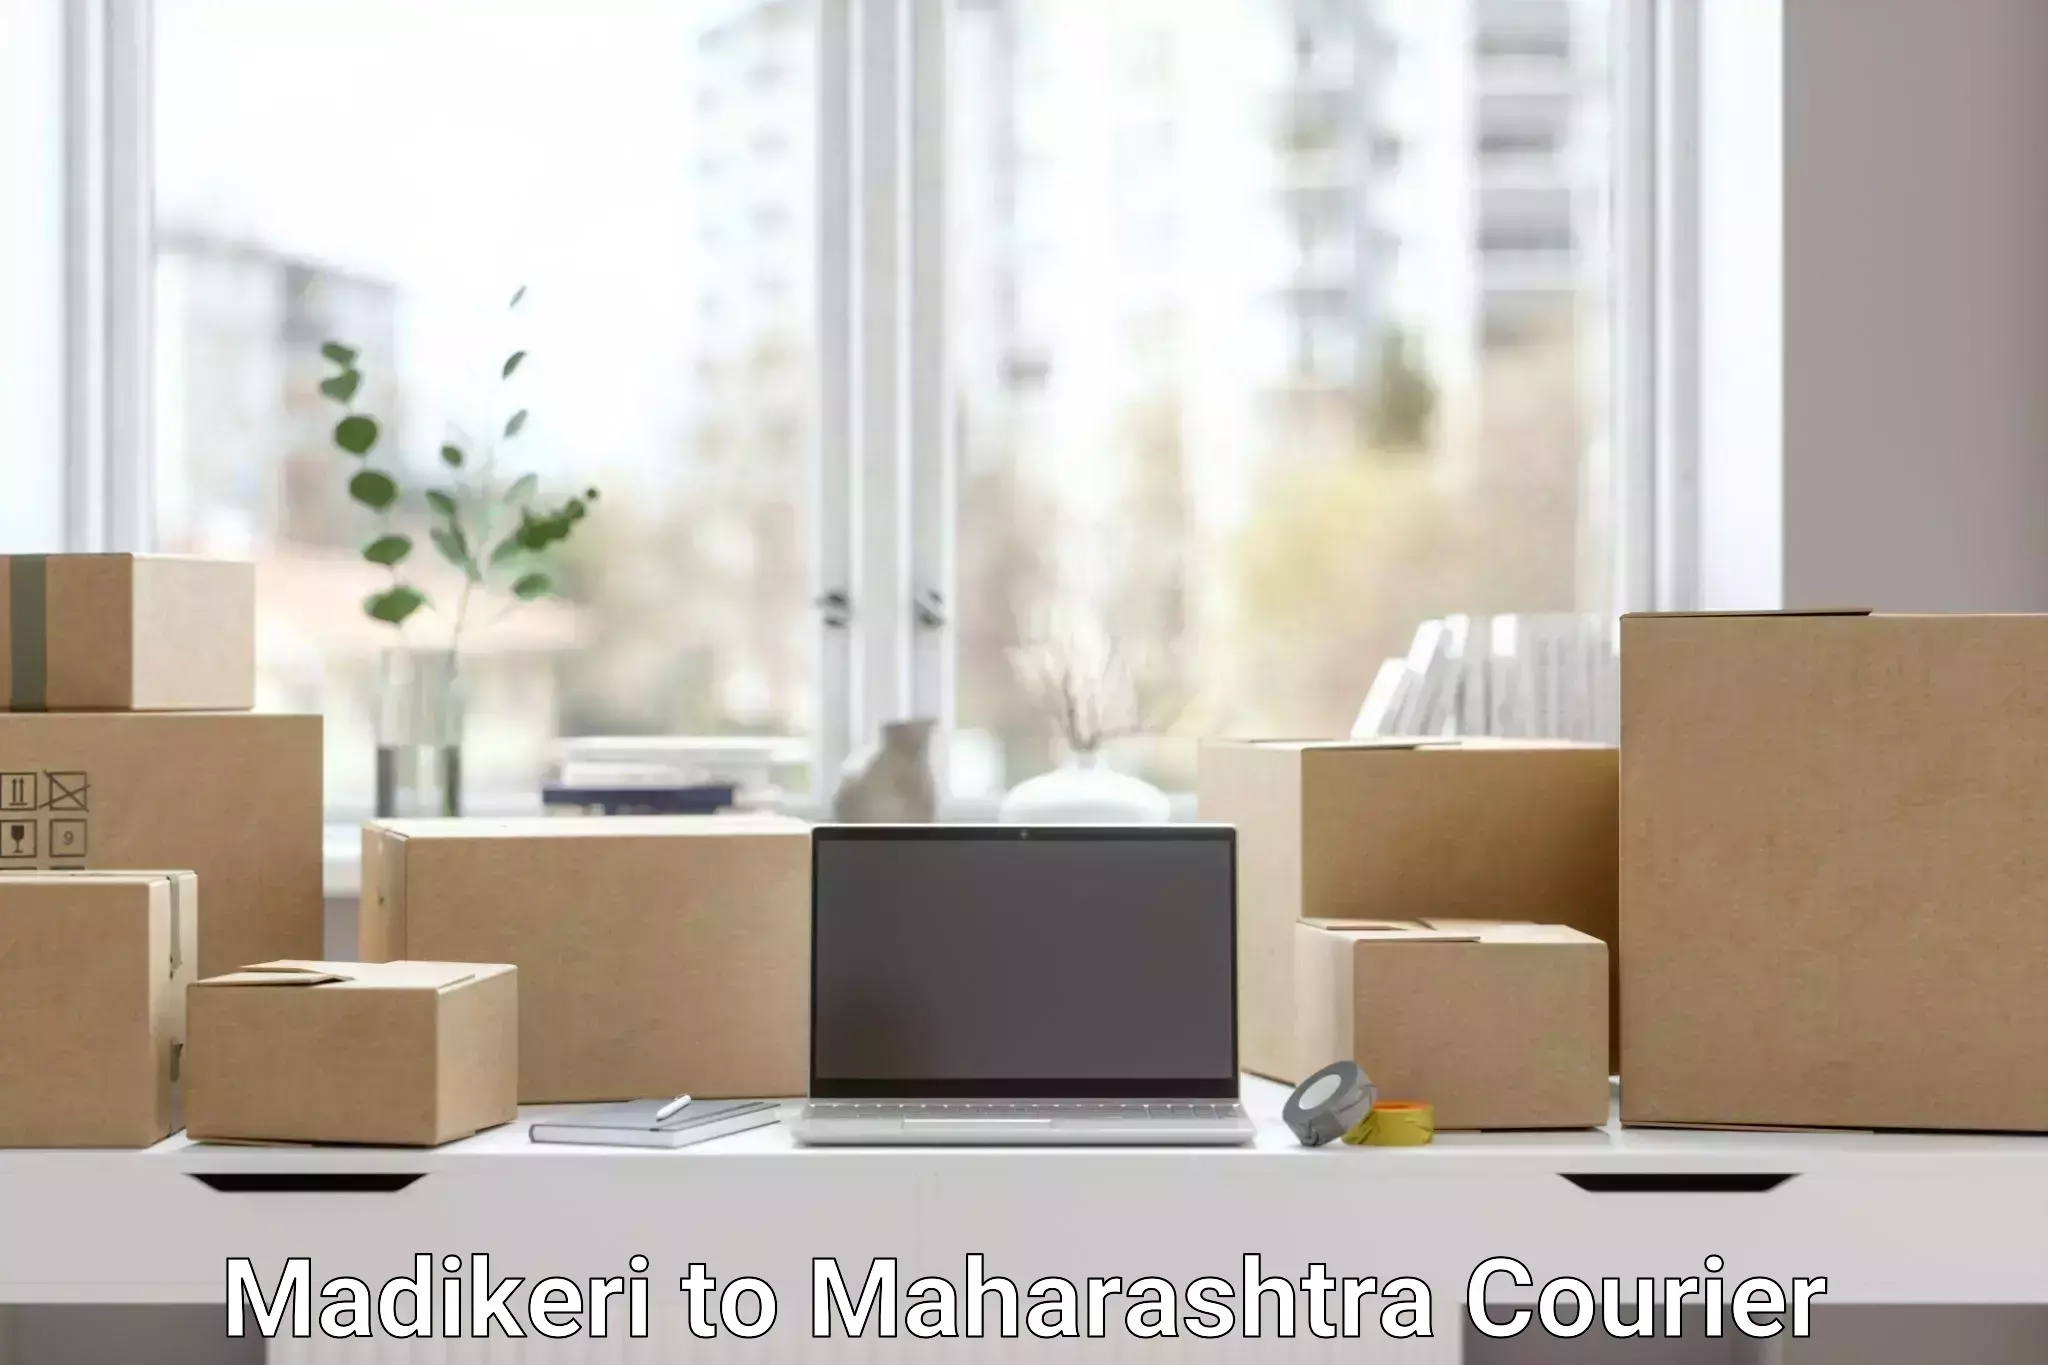 Courier service booking in Madikeri to Akola